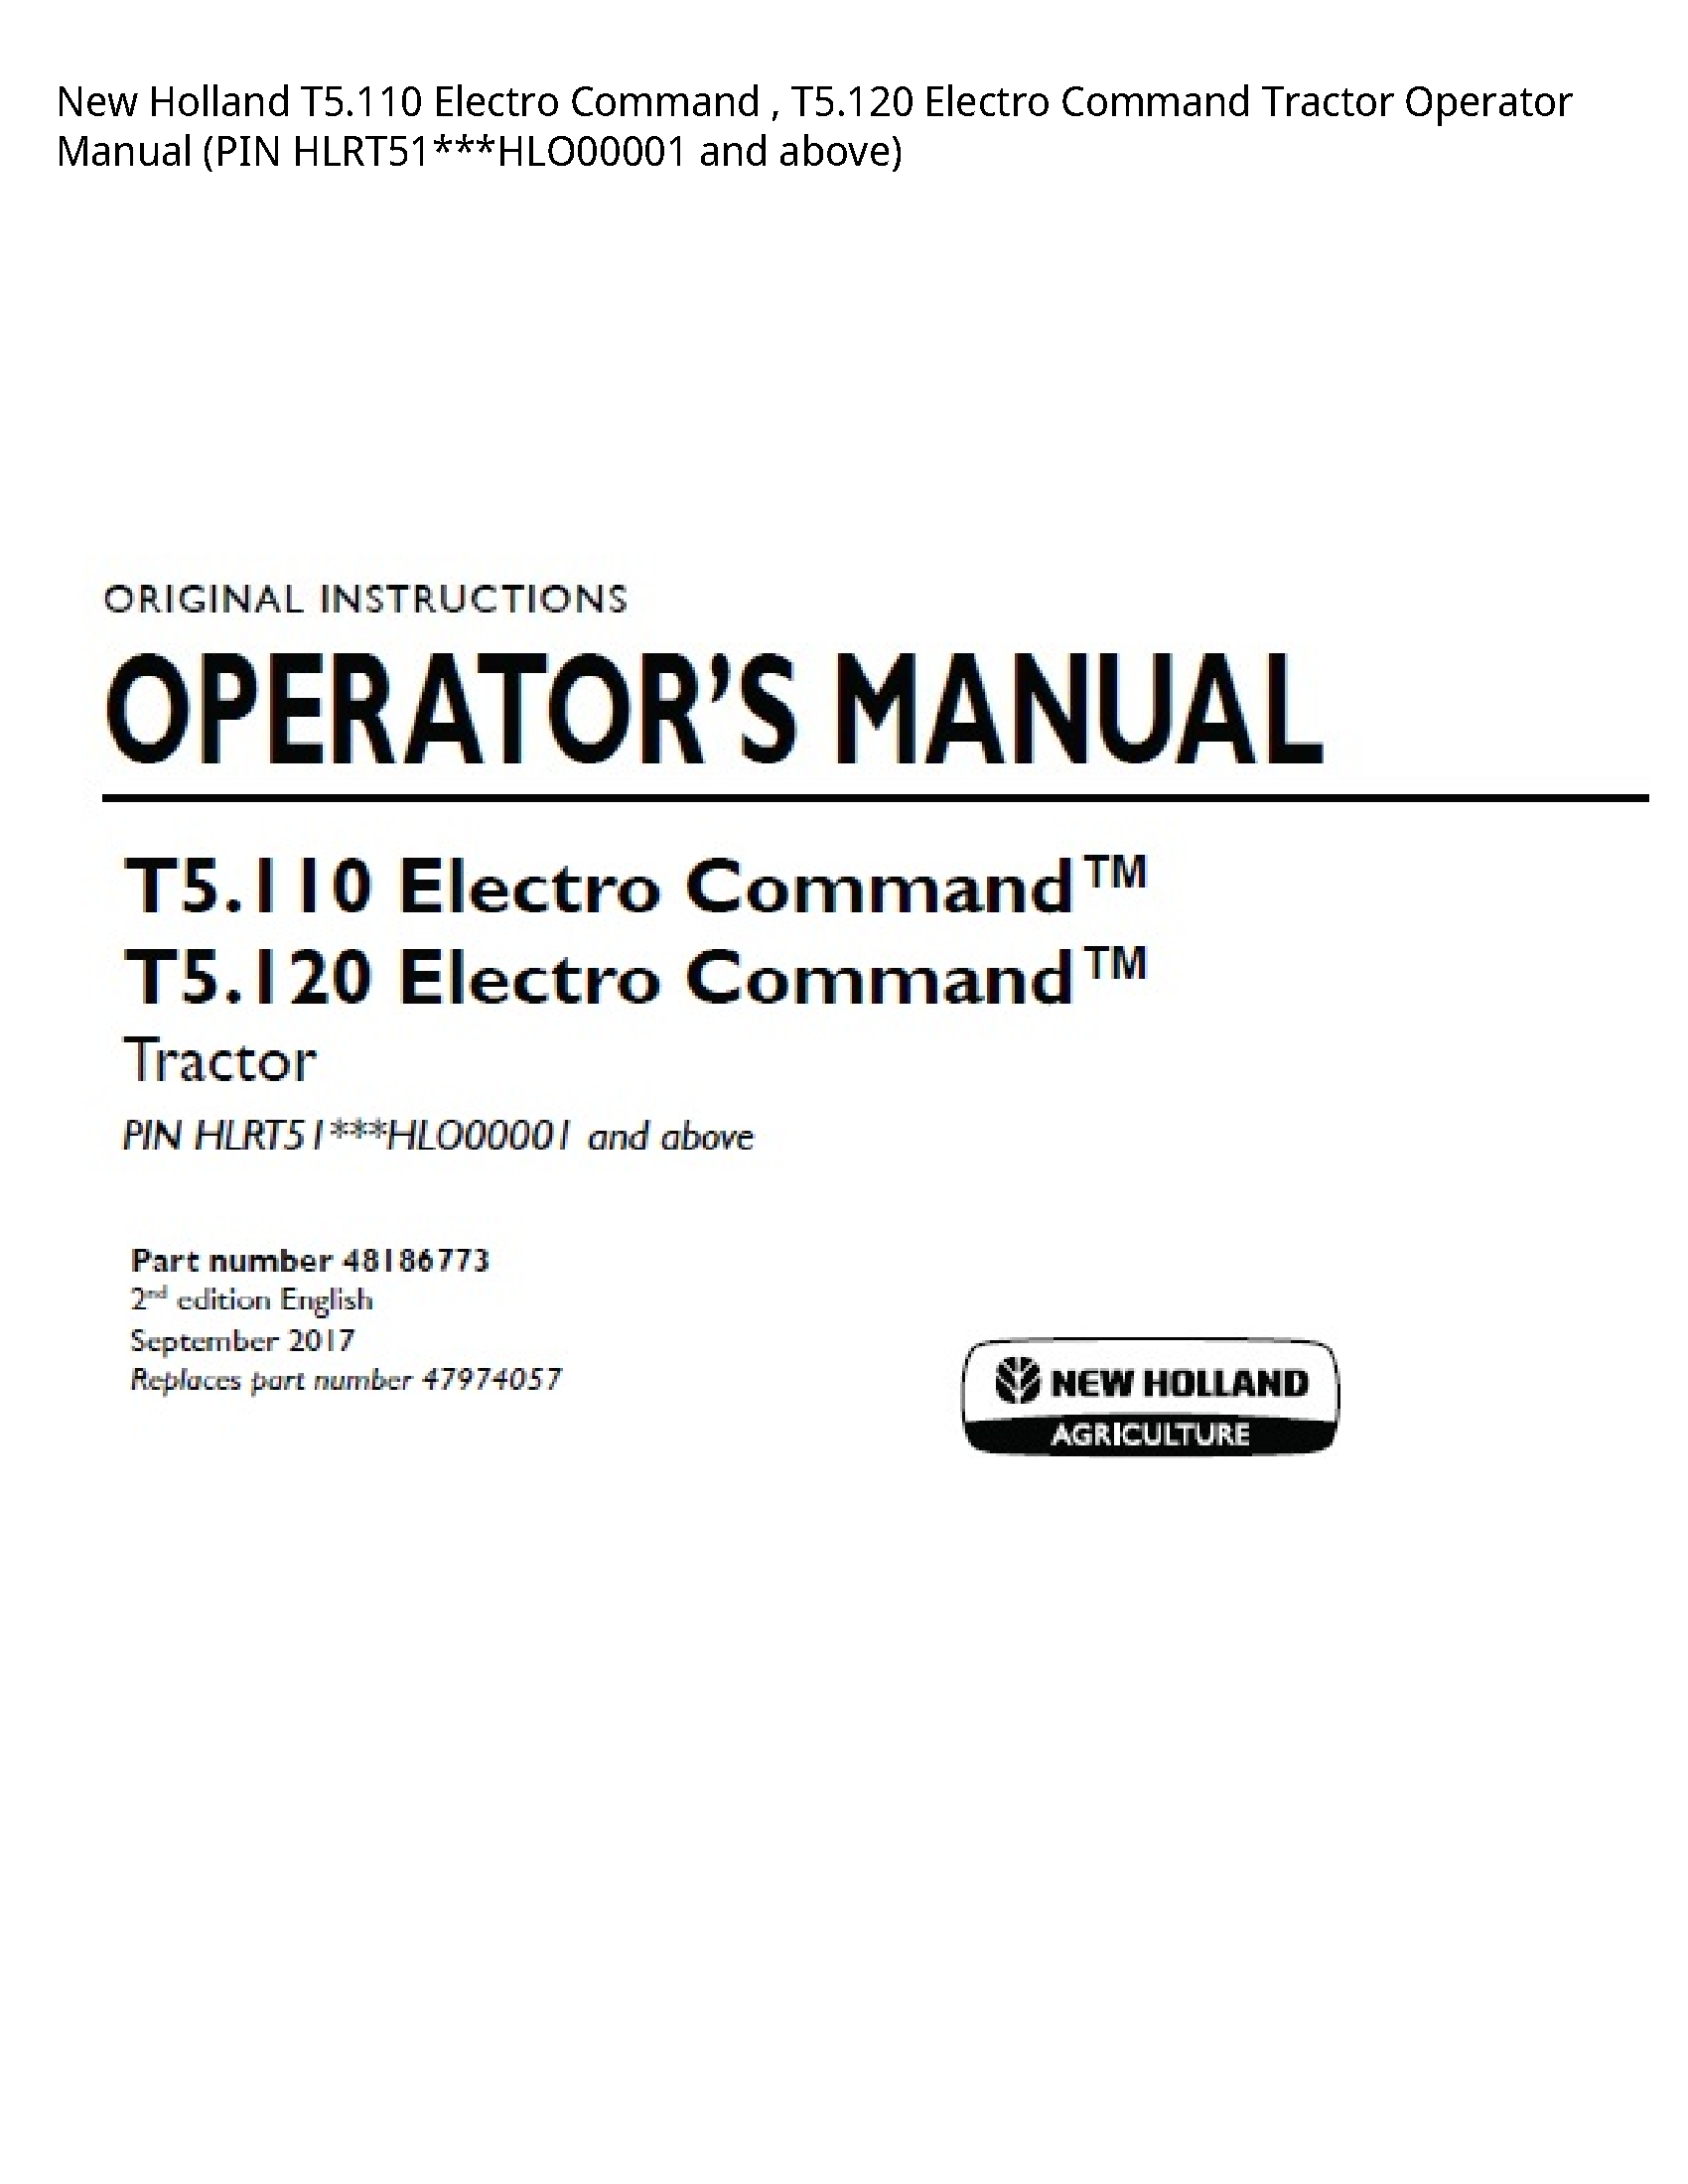 New Holland T5.110 Electro Command Electro Command Tractor Operator manual